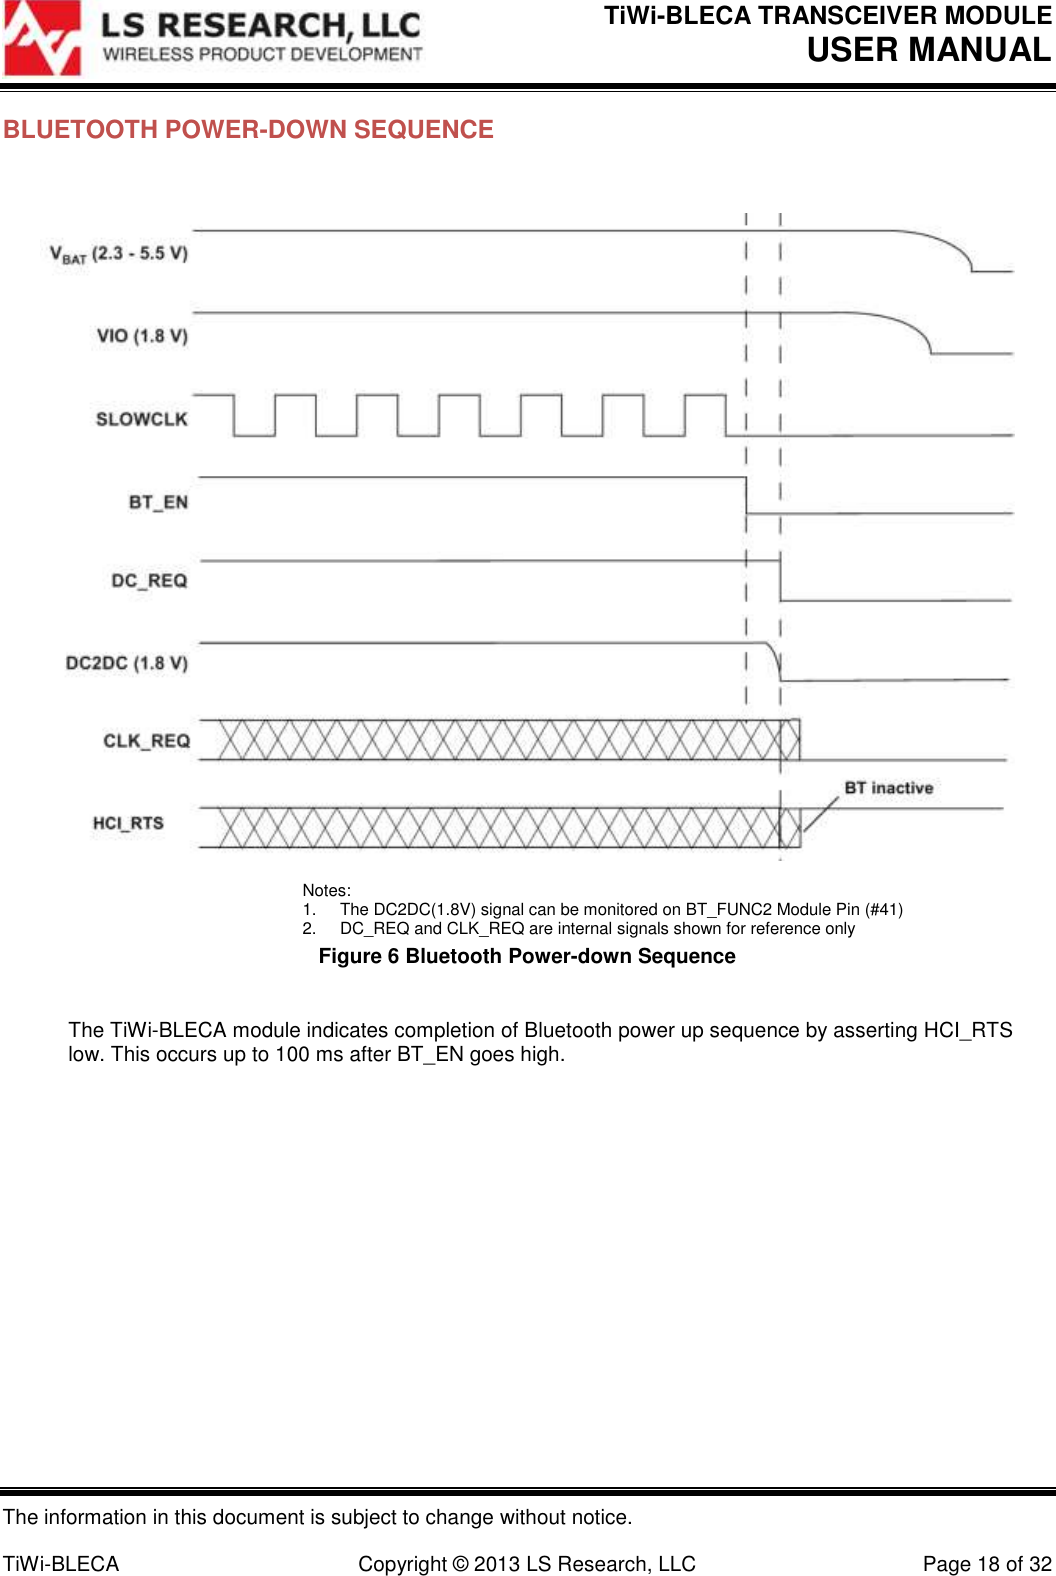 TiWi-BLECA TRANSCEIVER MODULE USER MANUAL   The information in this document is subject to change without notice.  TiWi-BLECA  Copyright © 2013 LS Research, LLC  Page 18 of 32 BLUETOOTH POWER-DOWN SEQUENCE   Notes: 1.  The DC2DC(1.8V) signal can be monitored on BT_FUNC2 Module Pin (#41) 2.  DC_REQ and CLK_REQ are internal signals shown for reference only Figure 6 Bluetooth Power-down Sequence  The TiWi-BLECA module indicates completion of Bluetooth power up sequence by asserting HCI_RTS low. This occurs up to 100 ms after BT_EN goes high.   